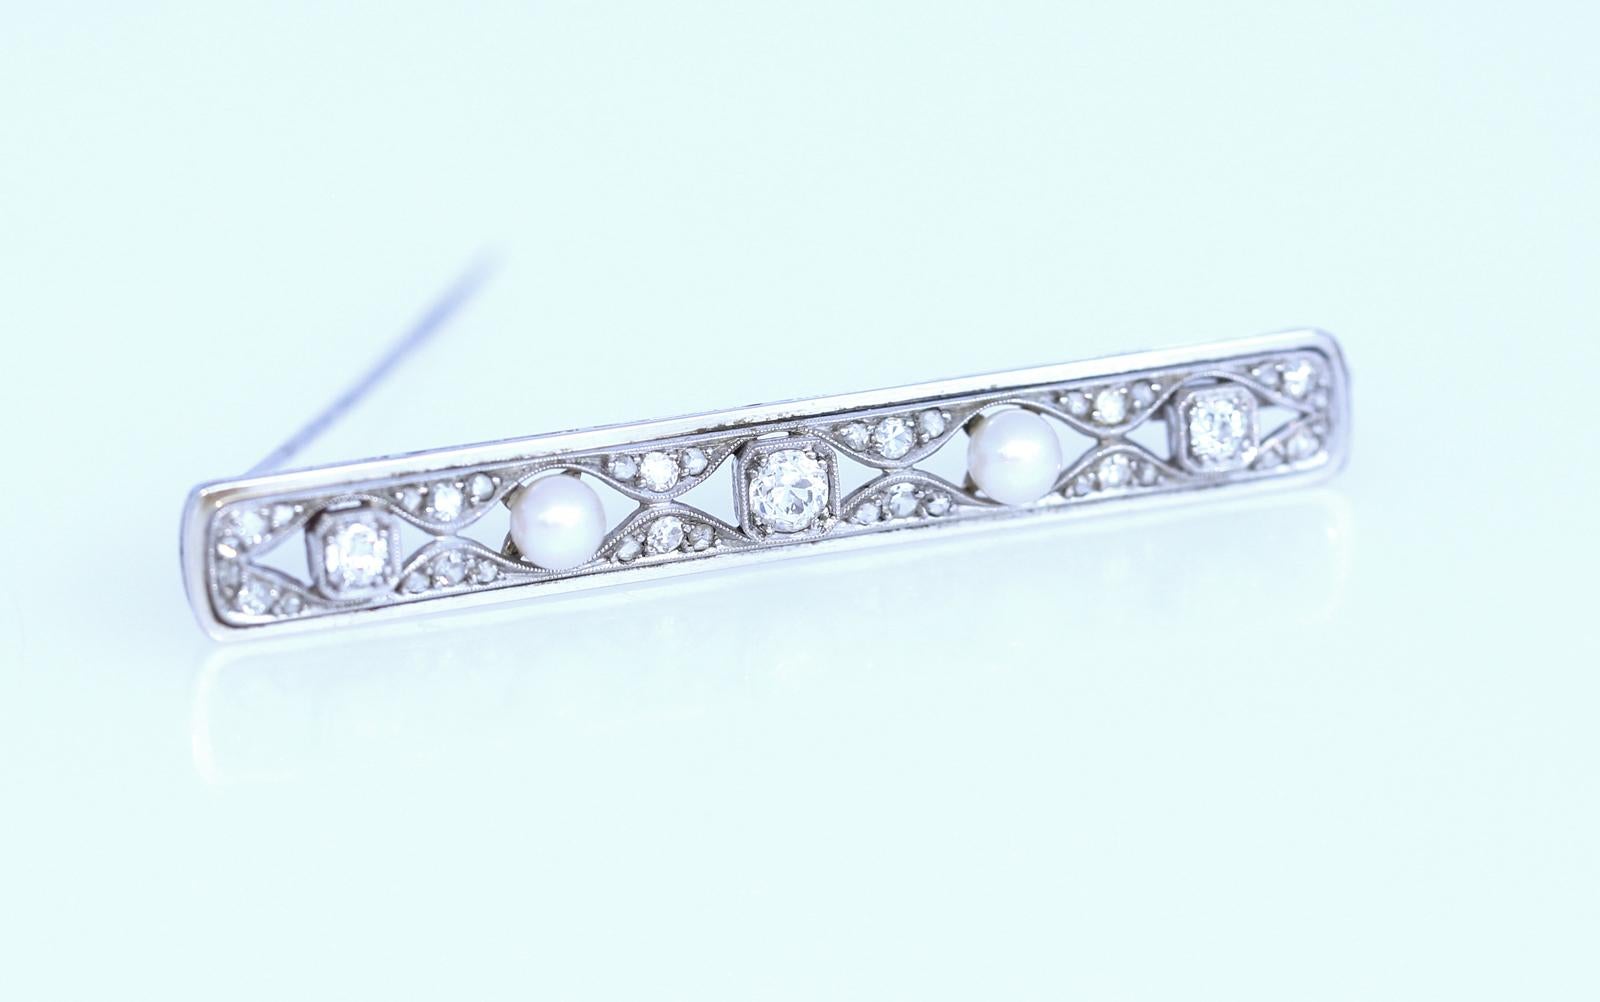 1Ct Old-cut Diamonds Pearls White Gold Bar Brooch. White Gold brooch contains two Pearls, three old European cut Diamonds weighing approximately 1 Ct in total. Additional 36 old European and mixed cut diamonds. Europe 1930. 
One of the fine,